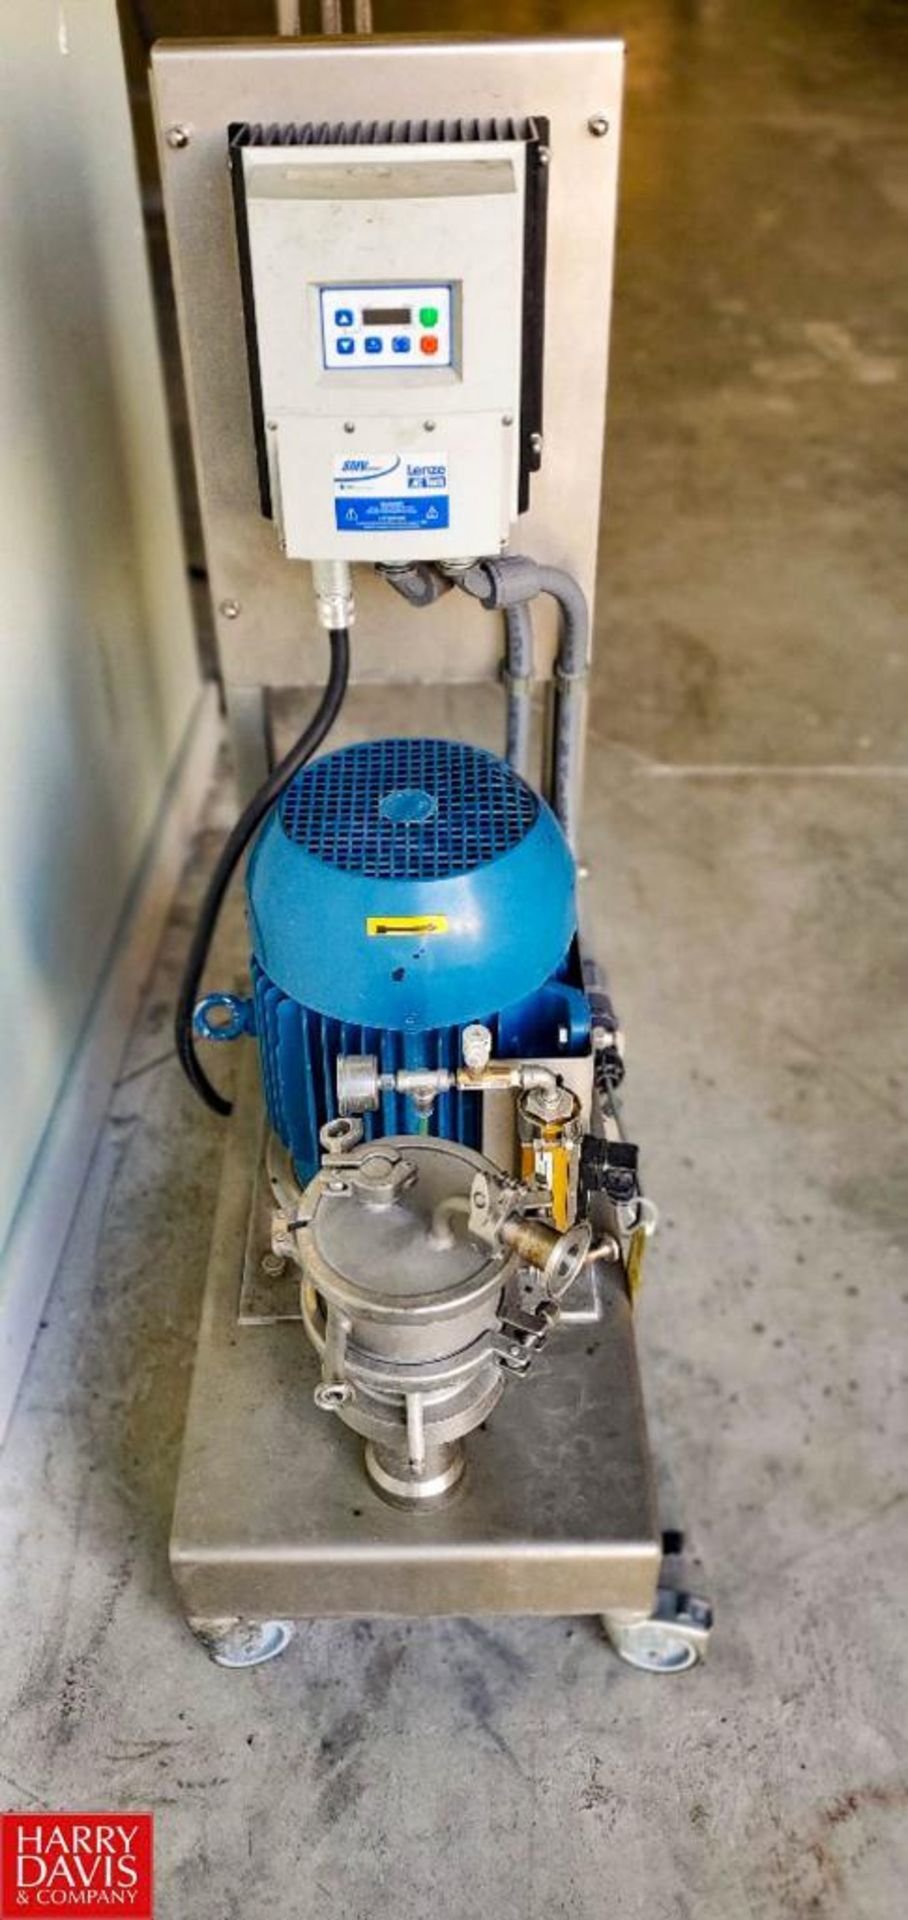 High Shear Dispersion Mixer Quadro Ytron with 7.5 HPp Motor with Variable-Frequency Drives on S/S - Image 2 of 5